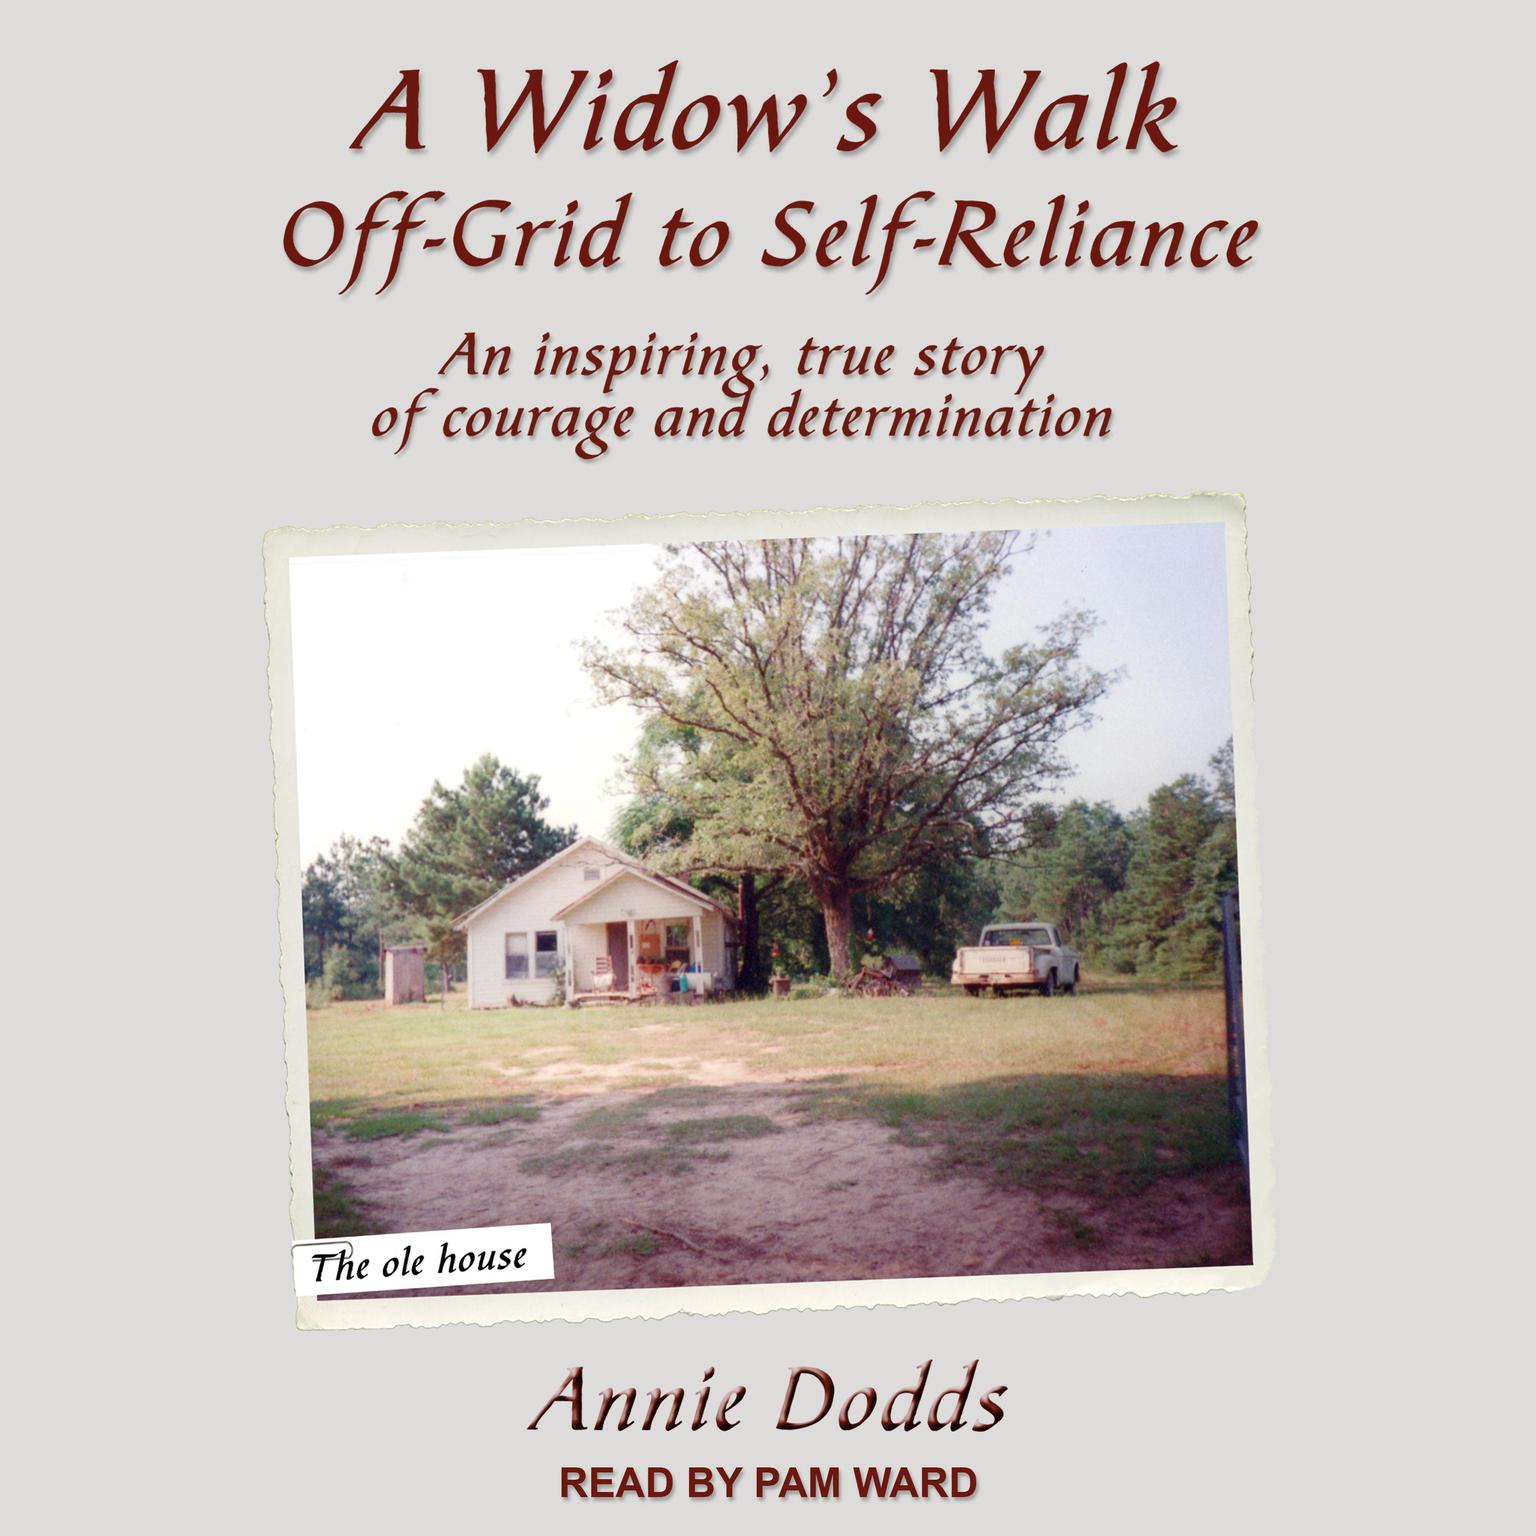 A Widows Walk Off-Grid to Self-Reliance: An Inspiring, True Story of Courage and Determination Audiobook, by Annie Dodds